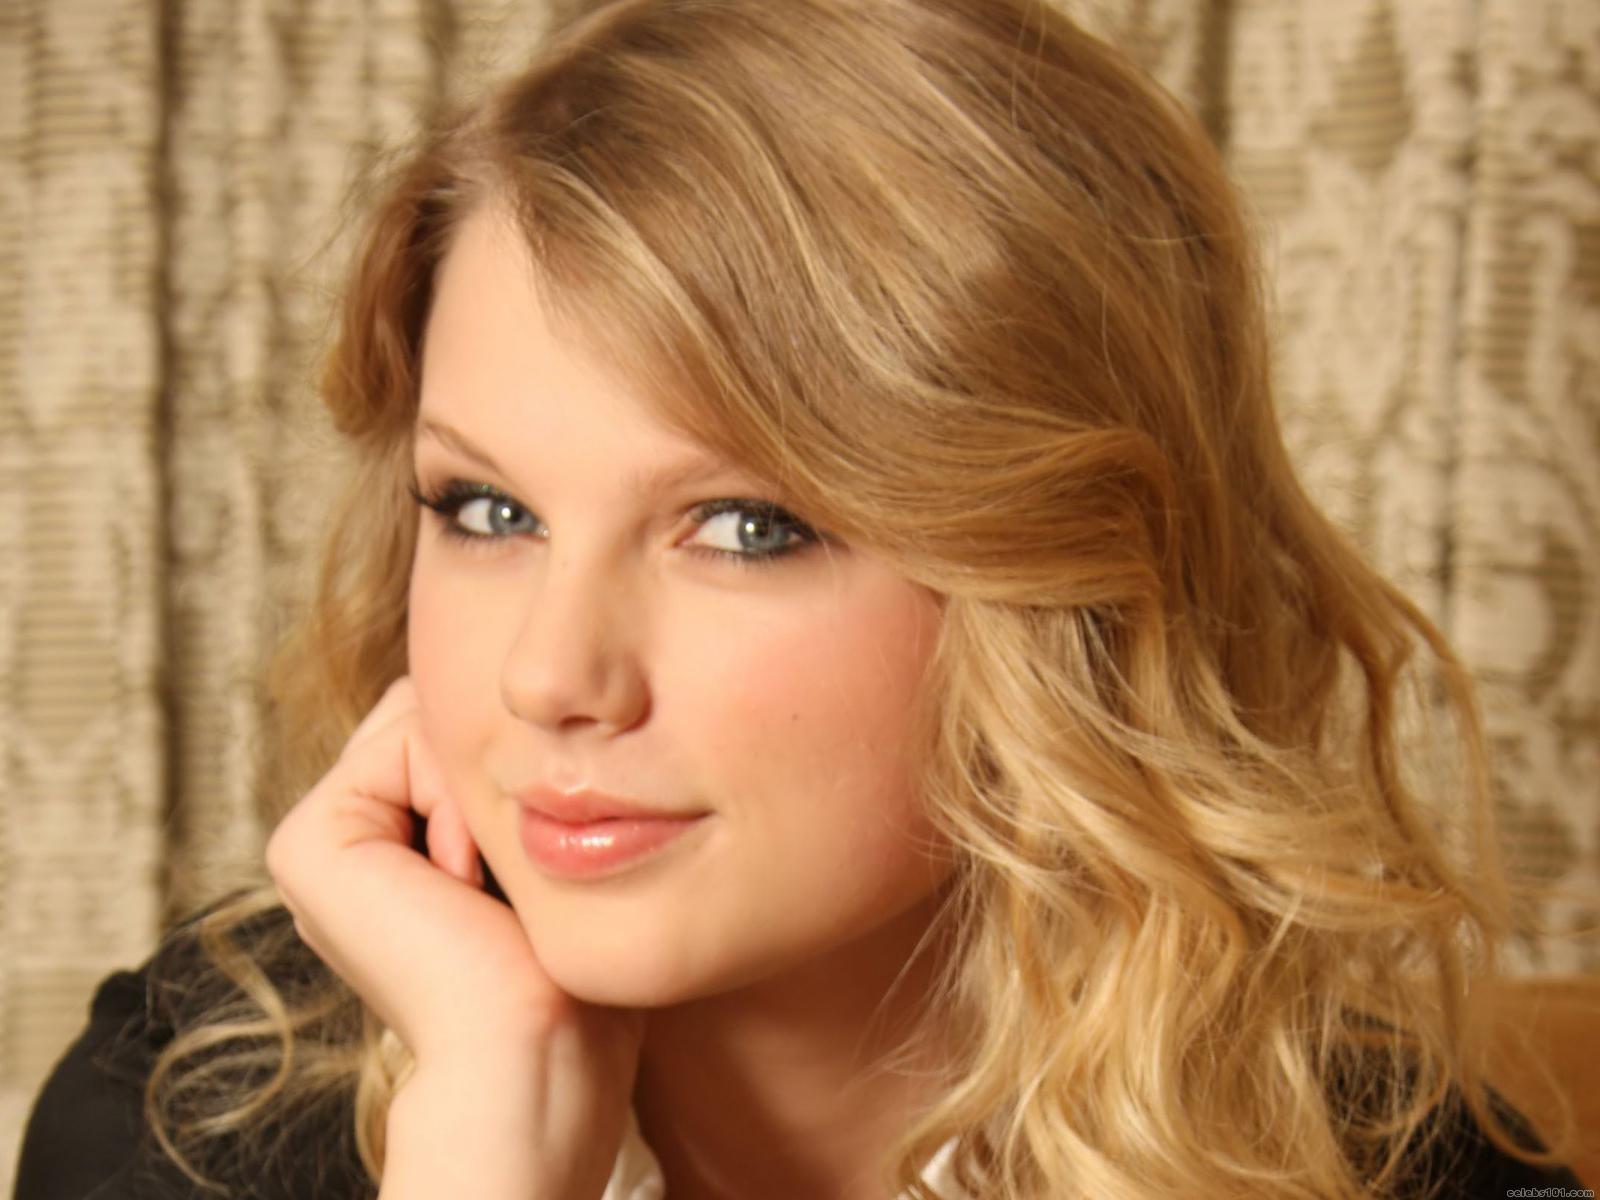 Taylor Swift, American child singers, American country banjoists, American country singer-songwriters, American female guitarists, Musicians from Pennsylvania